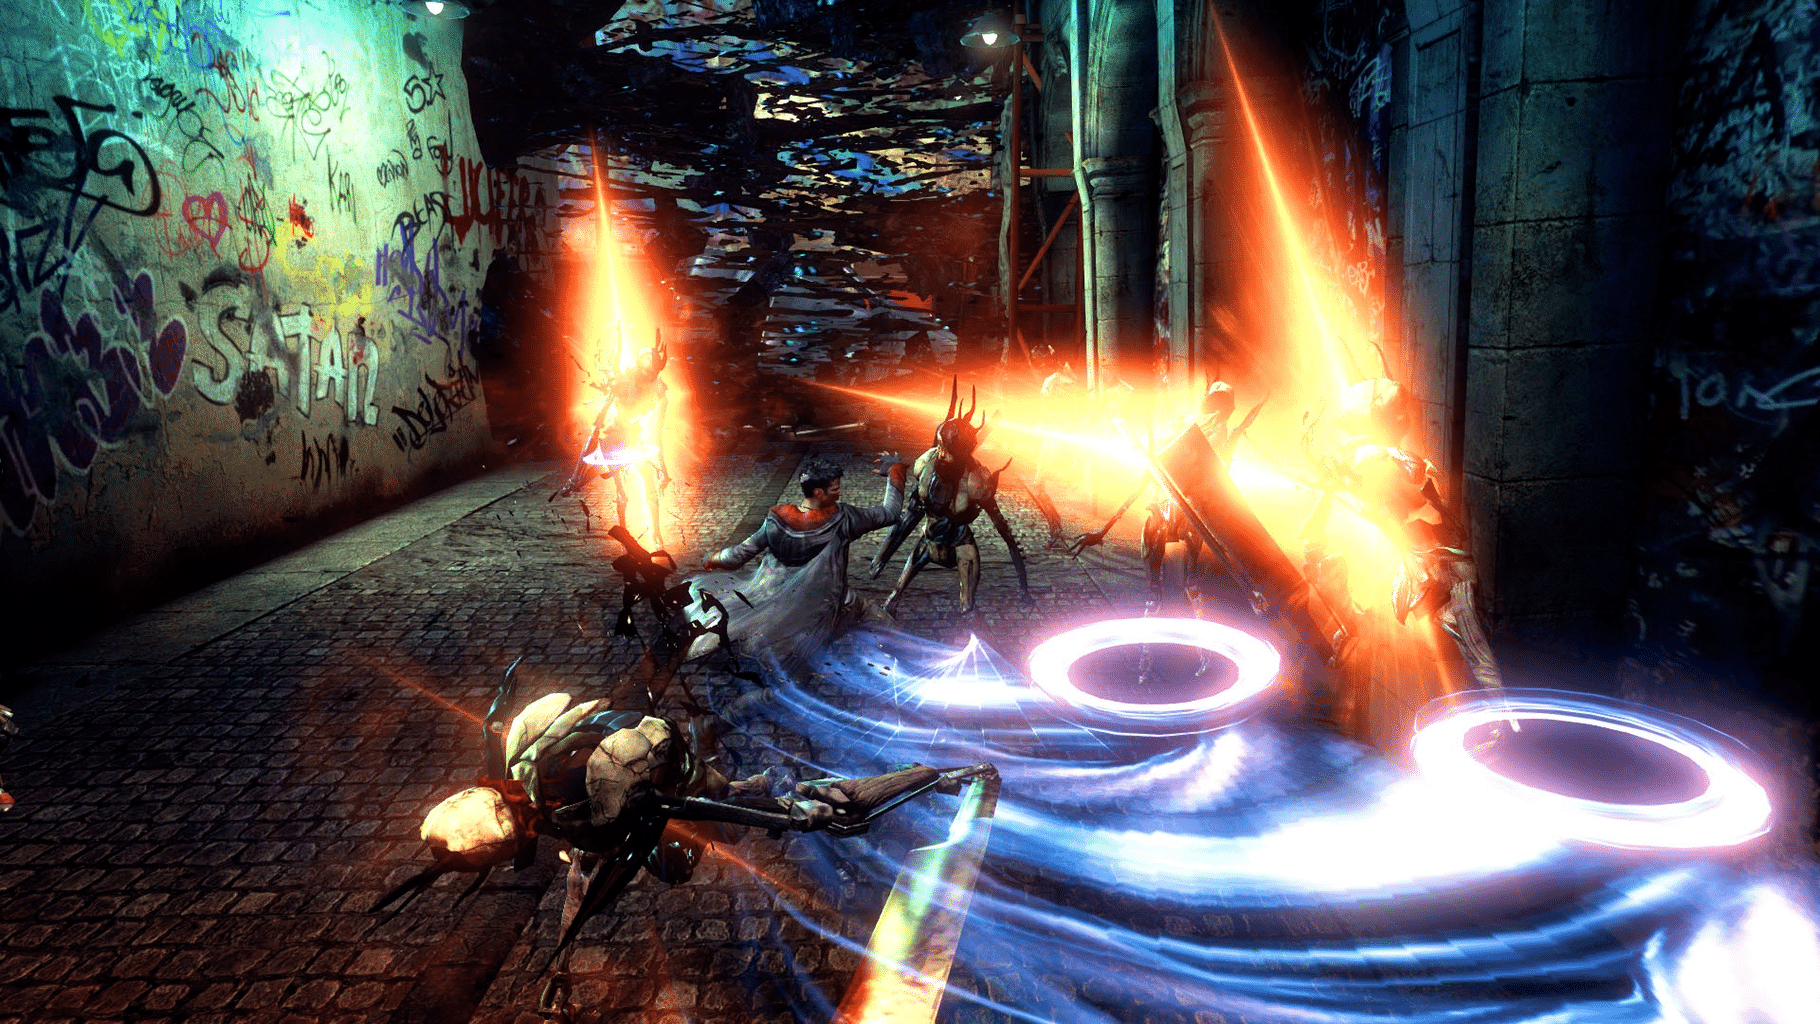 DmC Devil May Cry: Definitive Edition pushed up a week – Destructoid